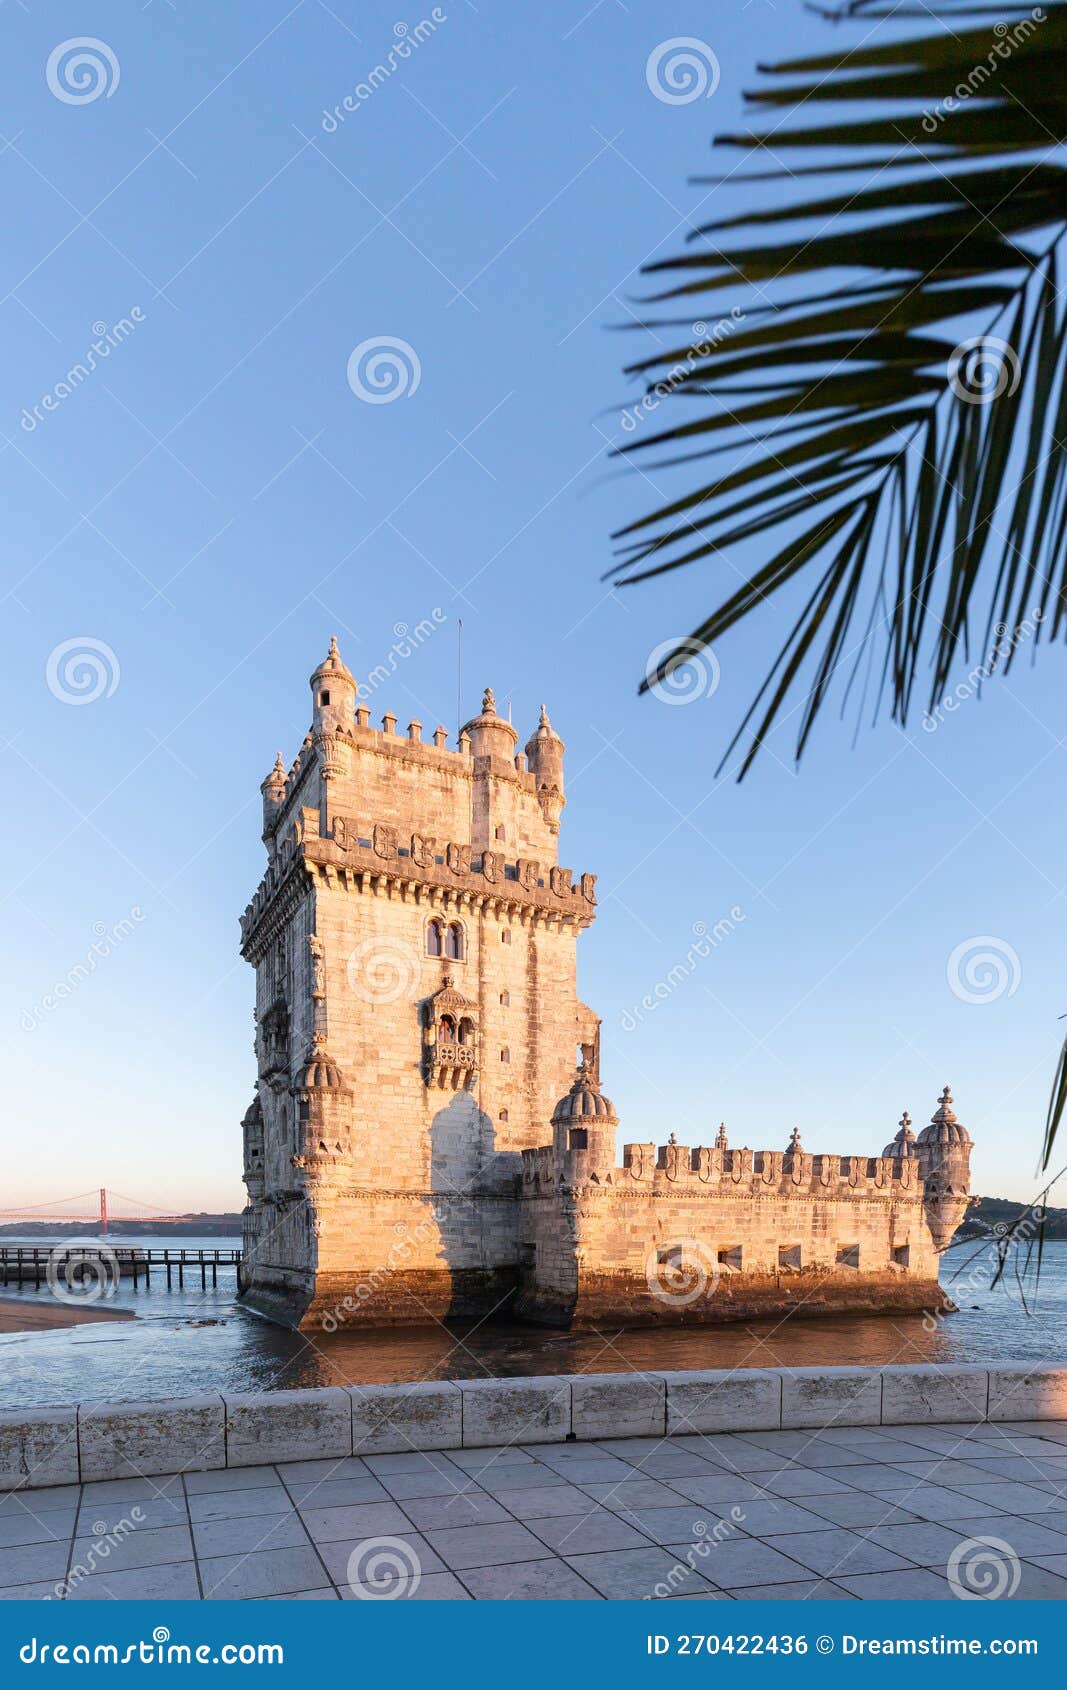 torre de belÃ©m on the banks of the tagus, historic watchtower in the sunset